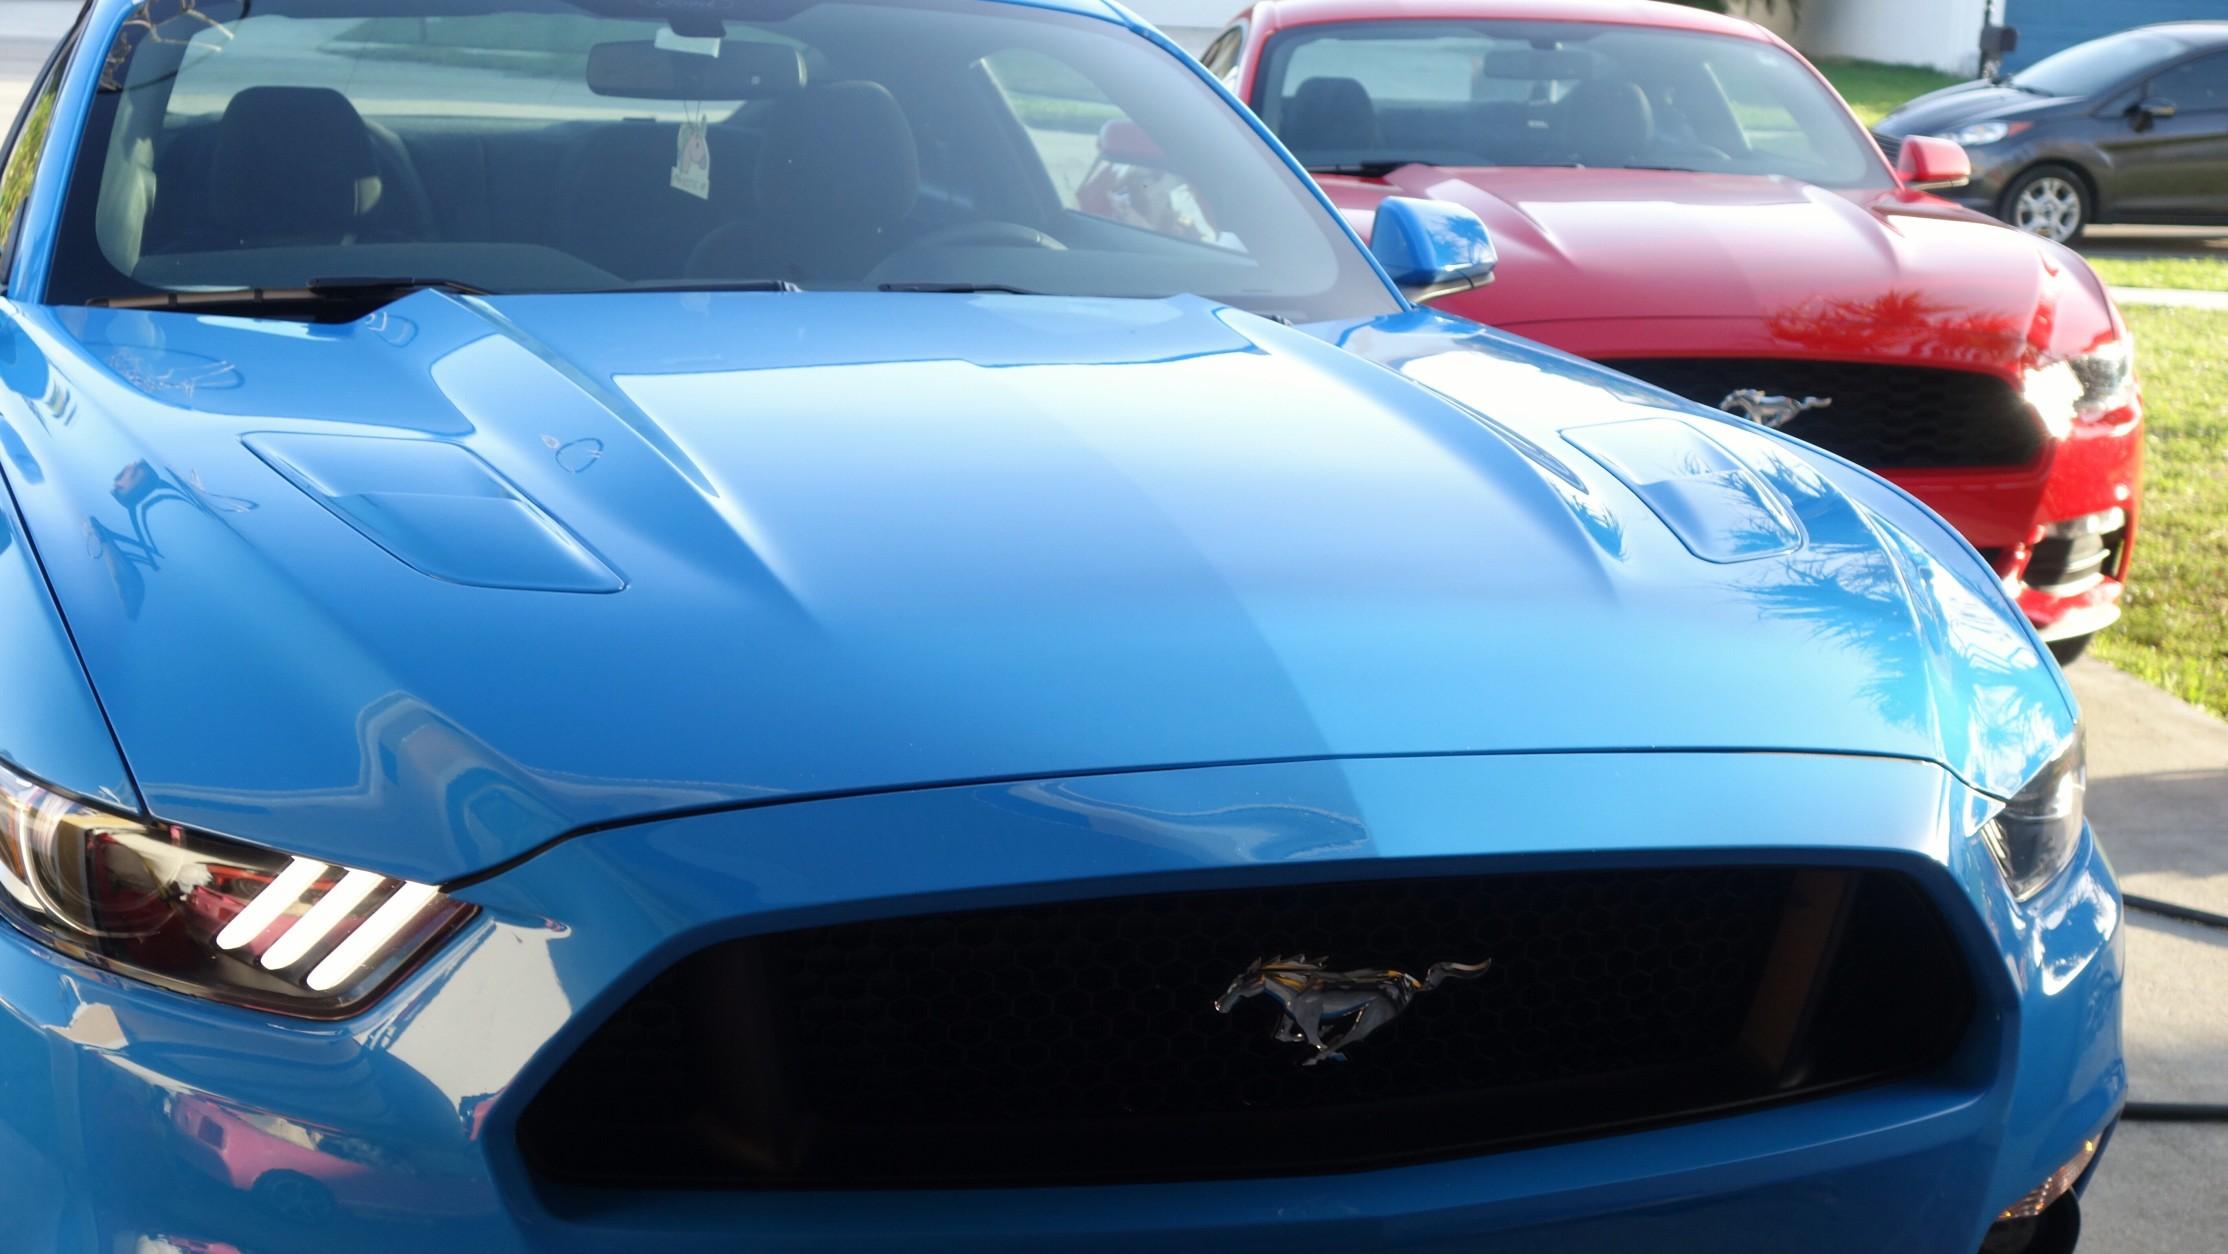 The Ford Mustang is a reasonably priced sports car. 